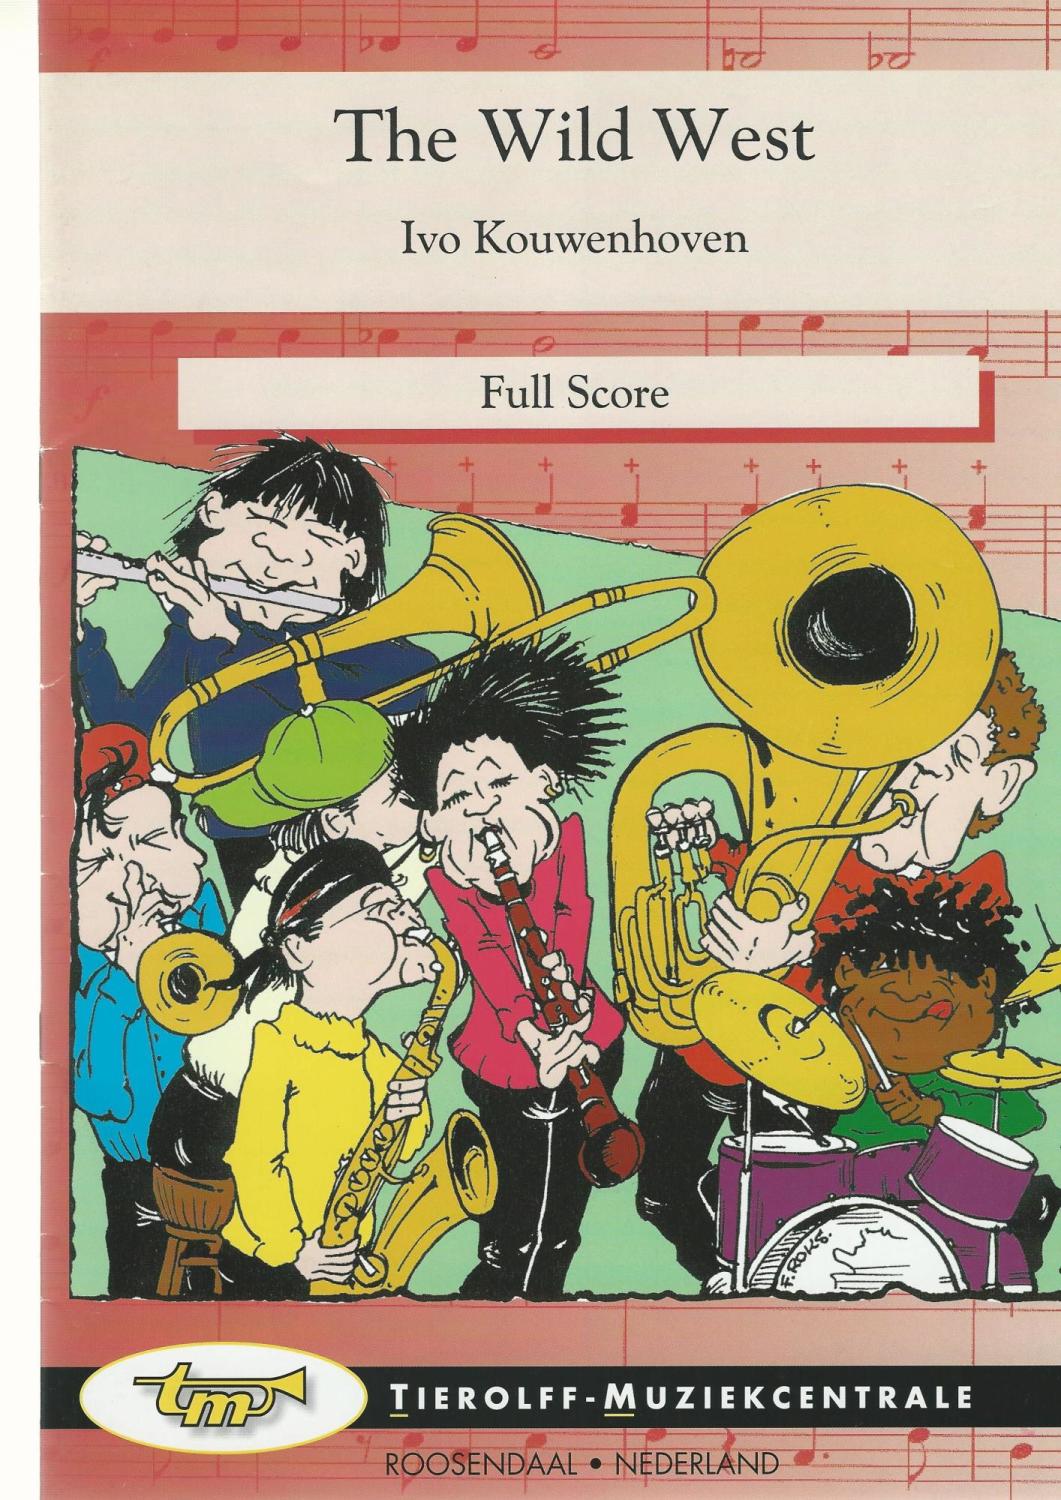 The Wild West for Brass Band (4 part Level 2) - Ivo Kouwenhoven